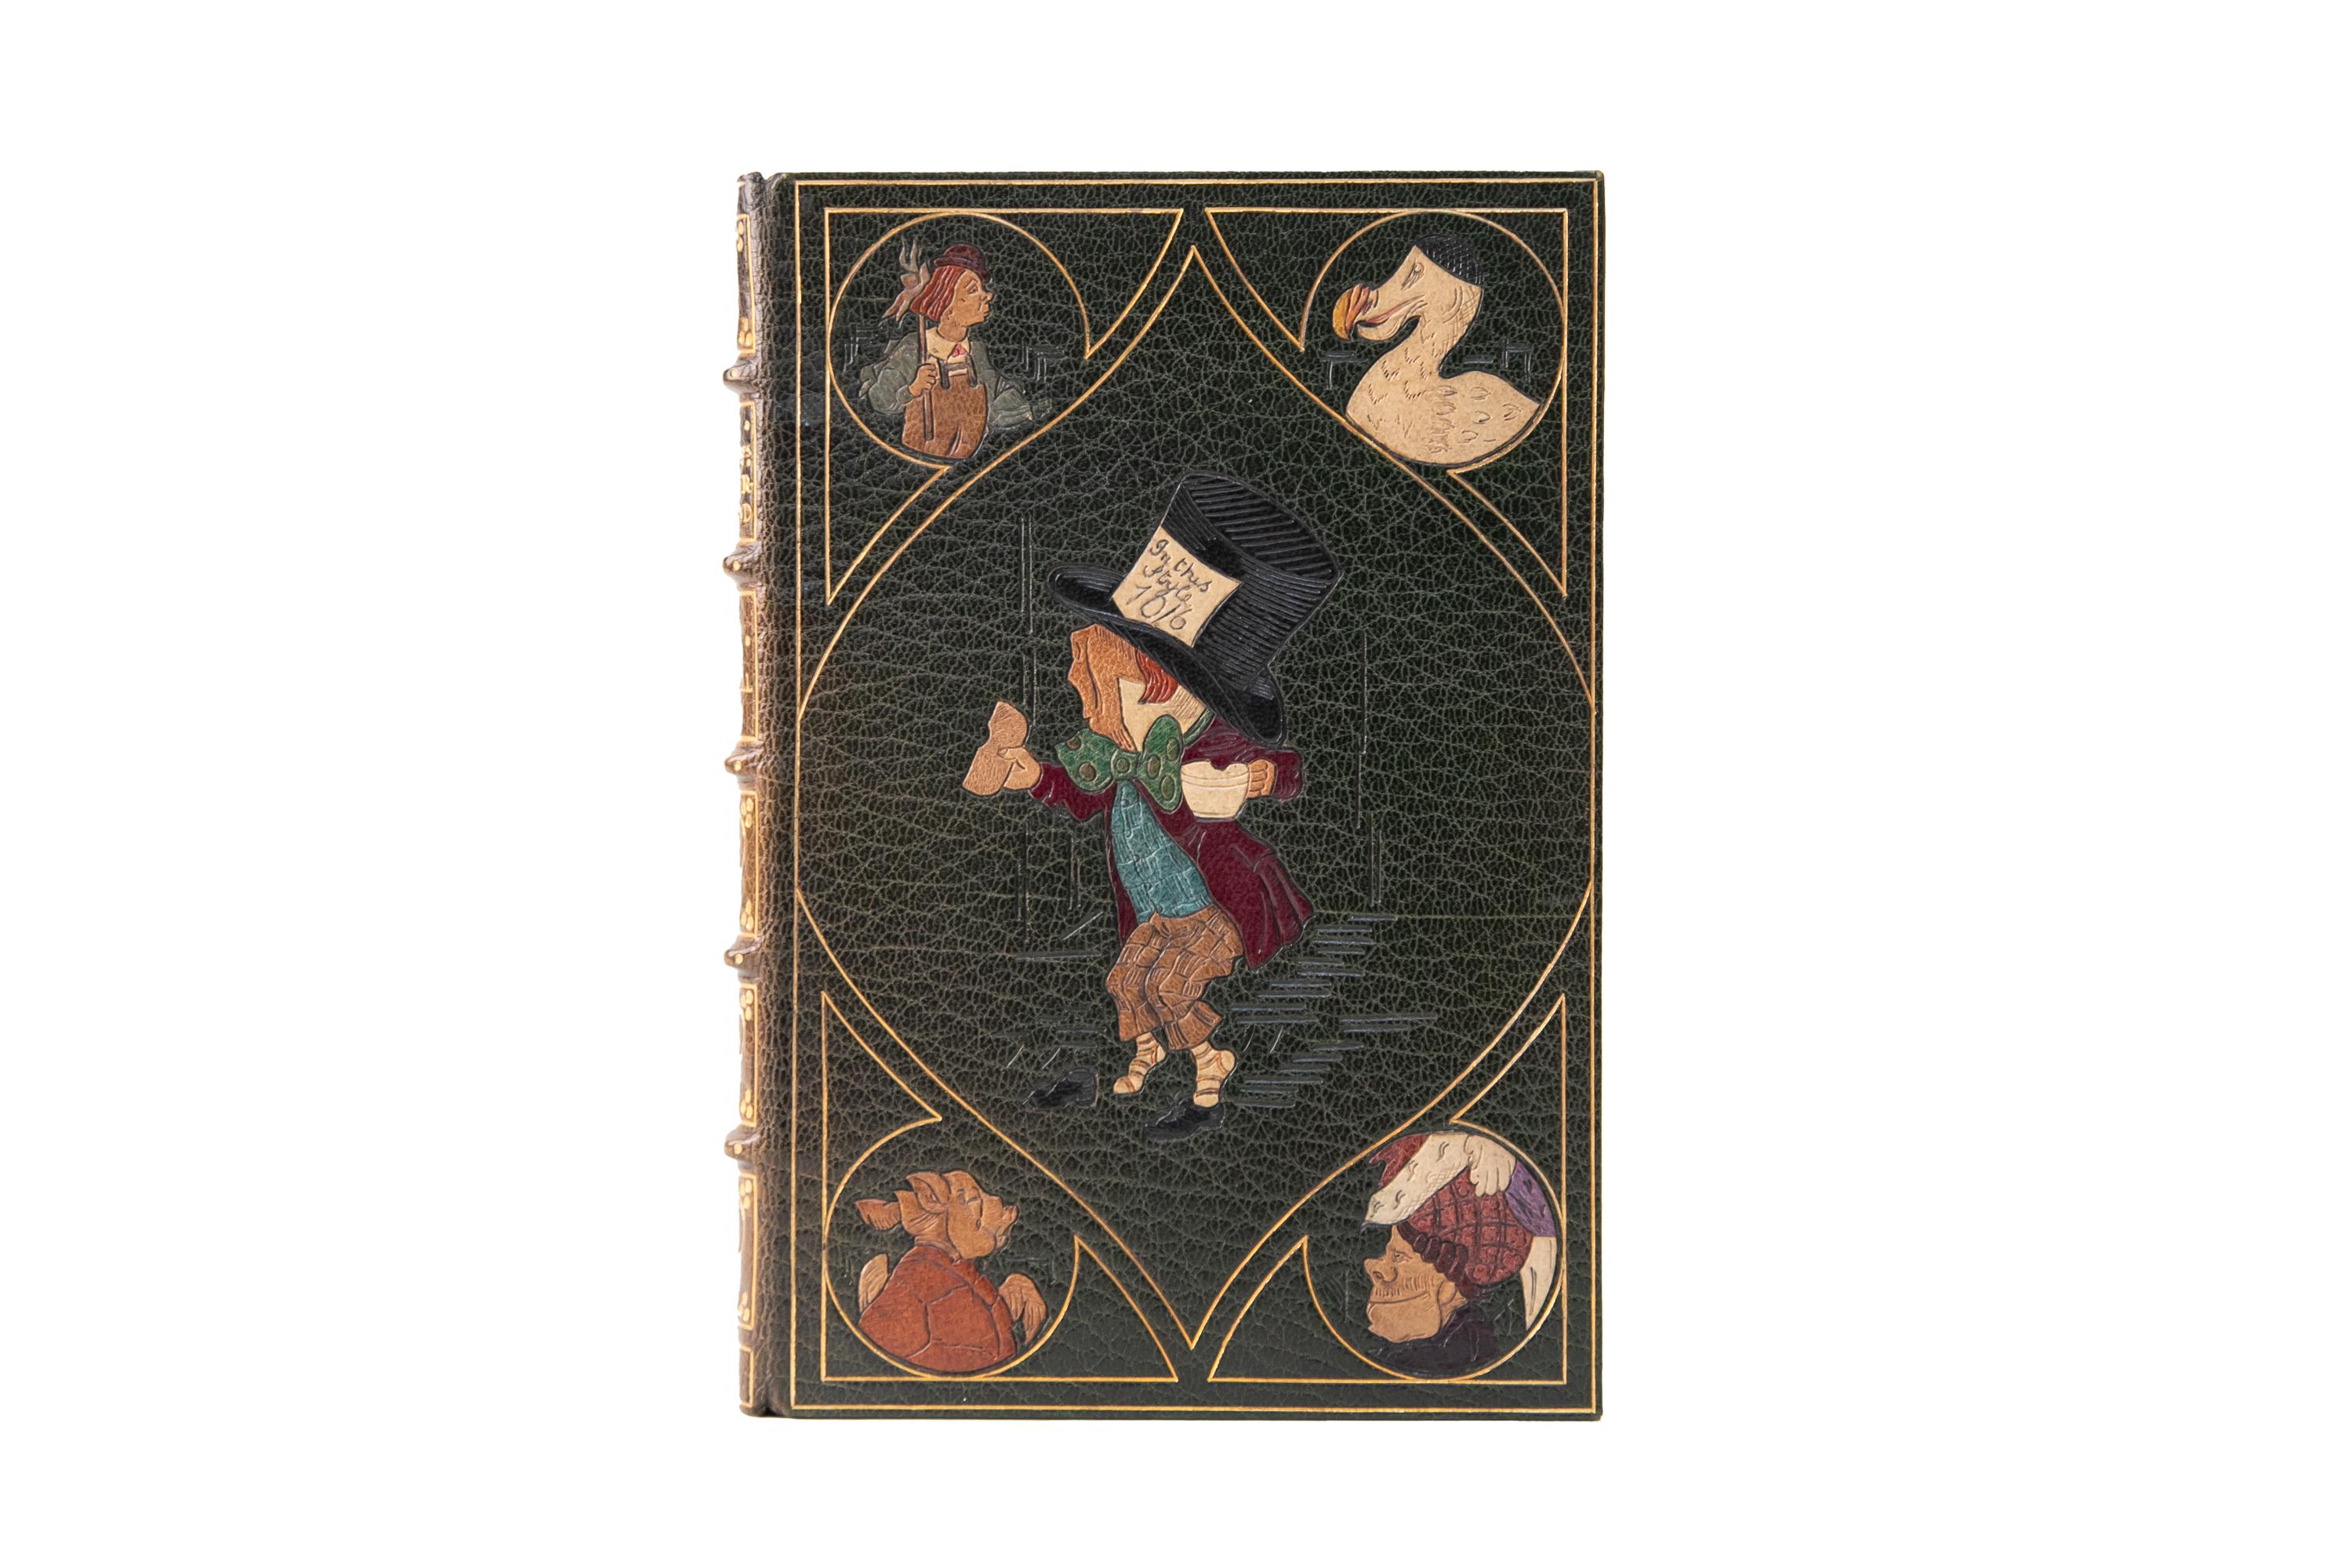 2 Volumes. Lewis Carroll, Alice's Adventures in Wonderland & Through the Looking-Glass. 6th Edition. Bound by Kelliegram in full green Morocco. The covers display intricate depictions of each character in multi-color inlay with gilt-tooled borders.